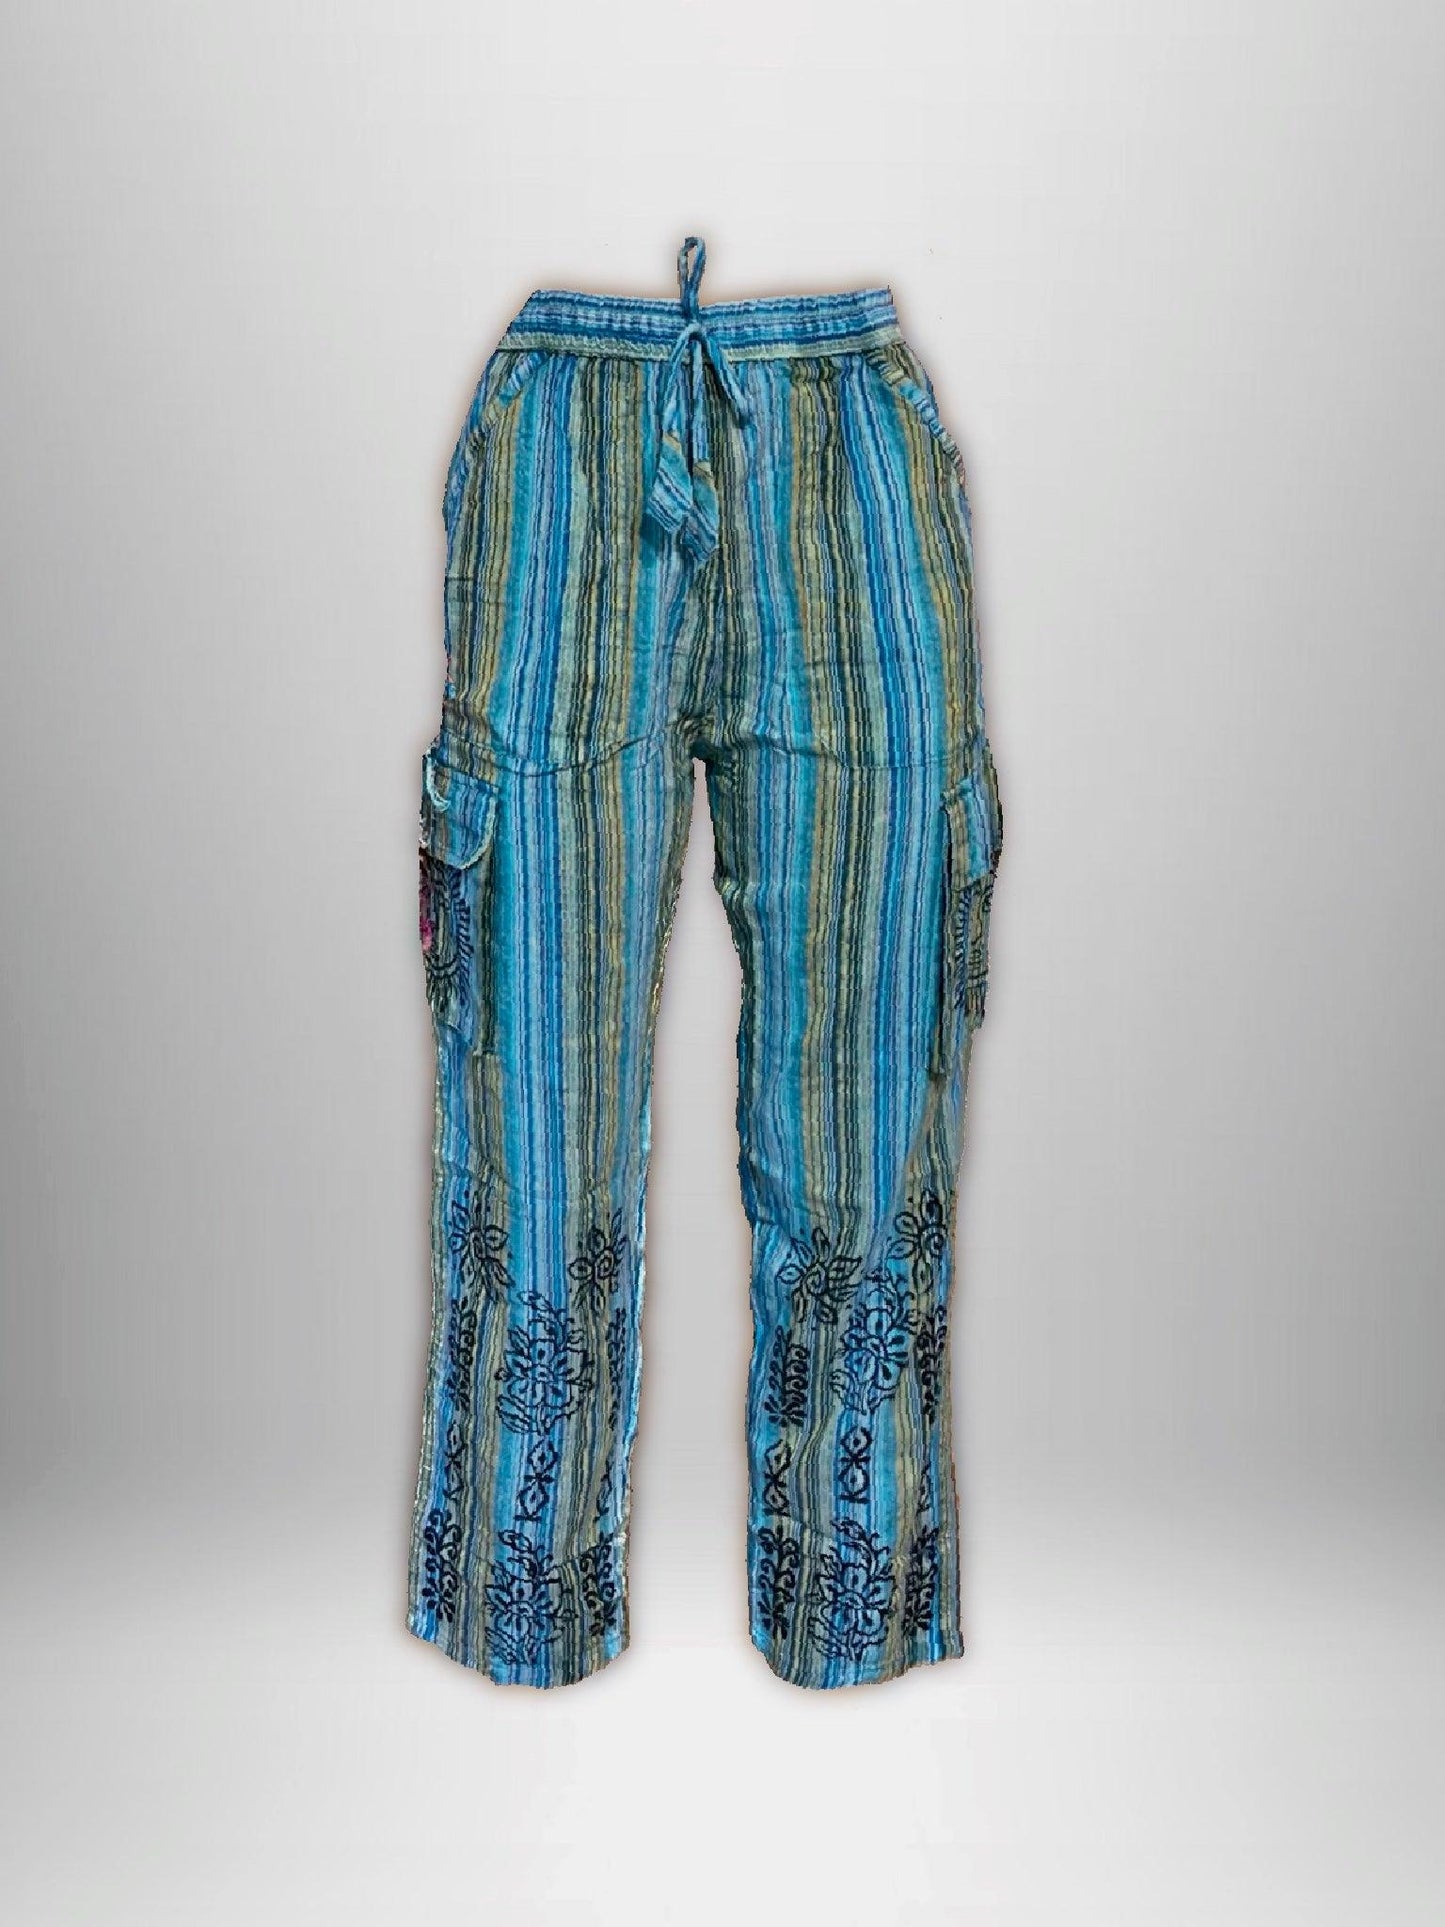 Riding Into the Sunshine Pants - Hippie Hued